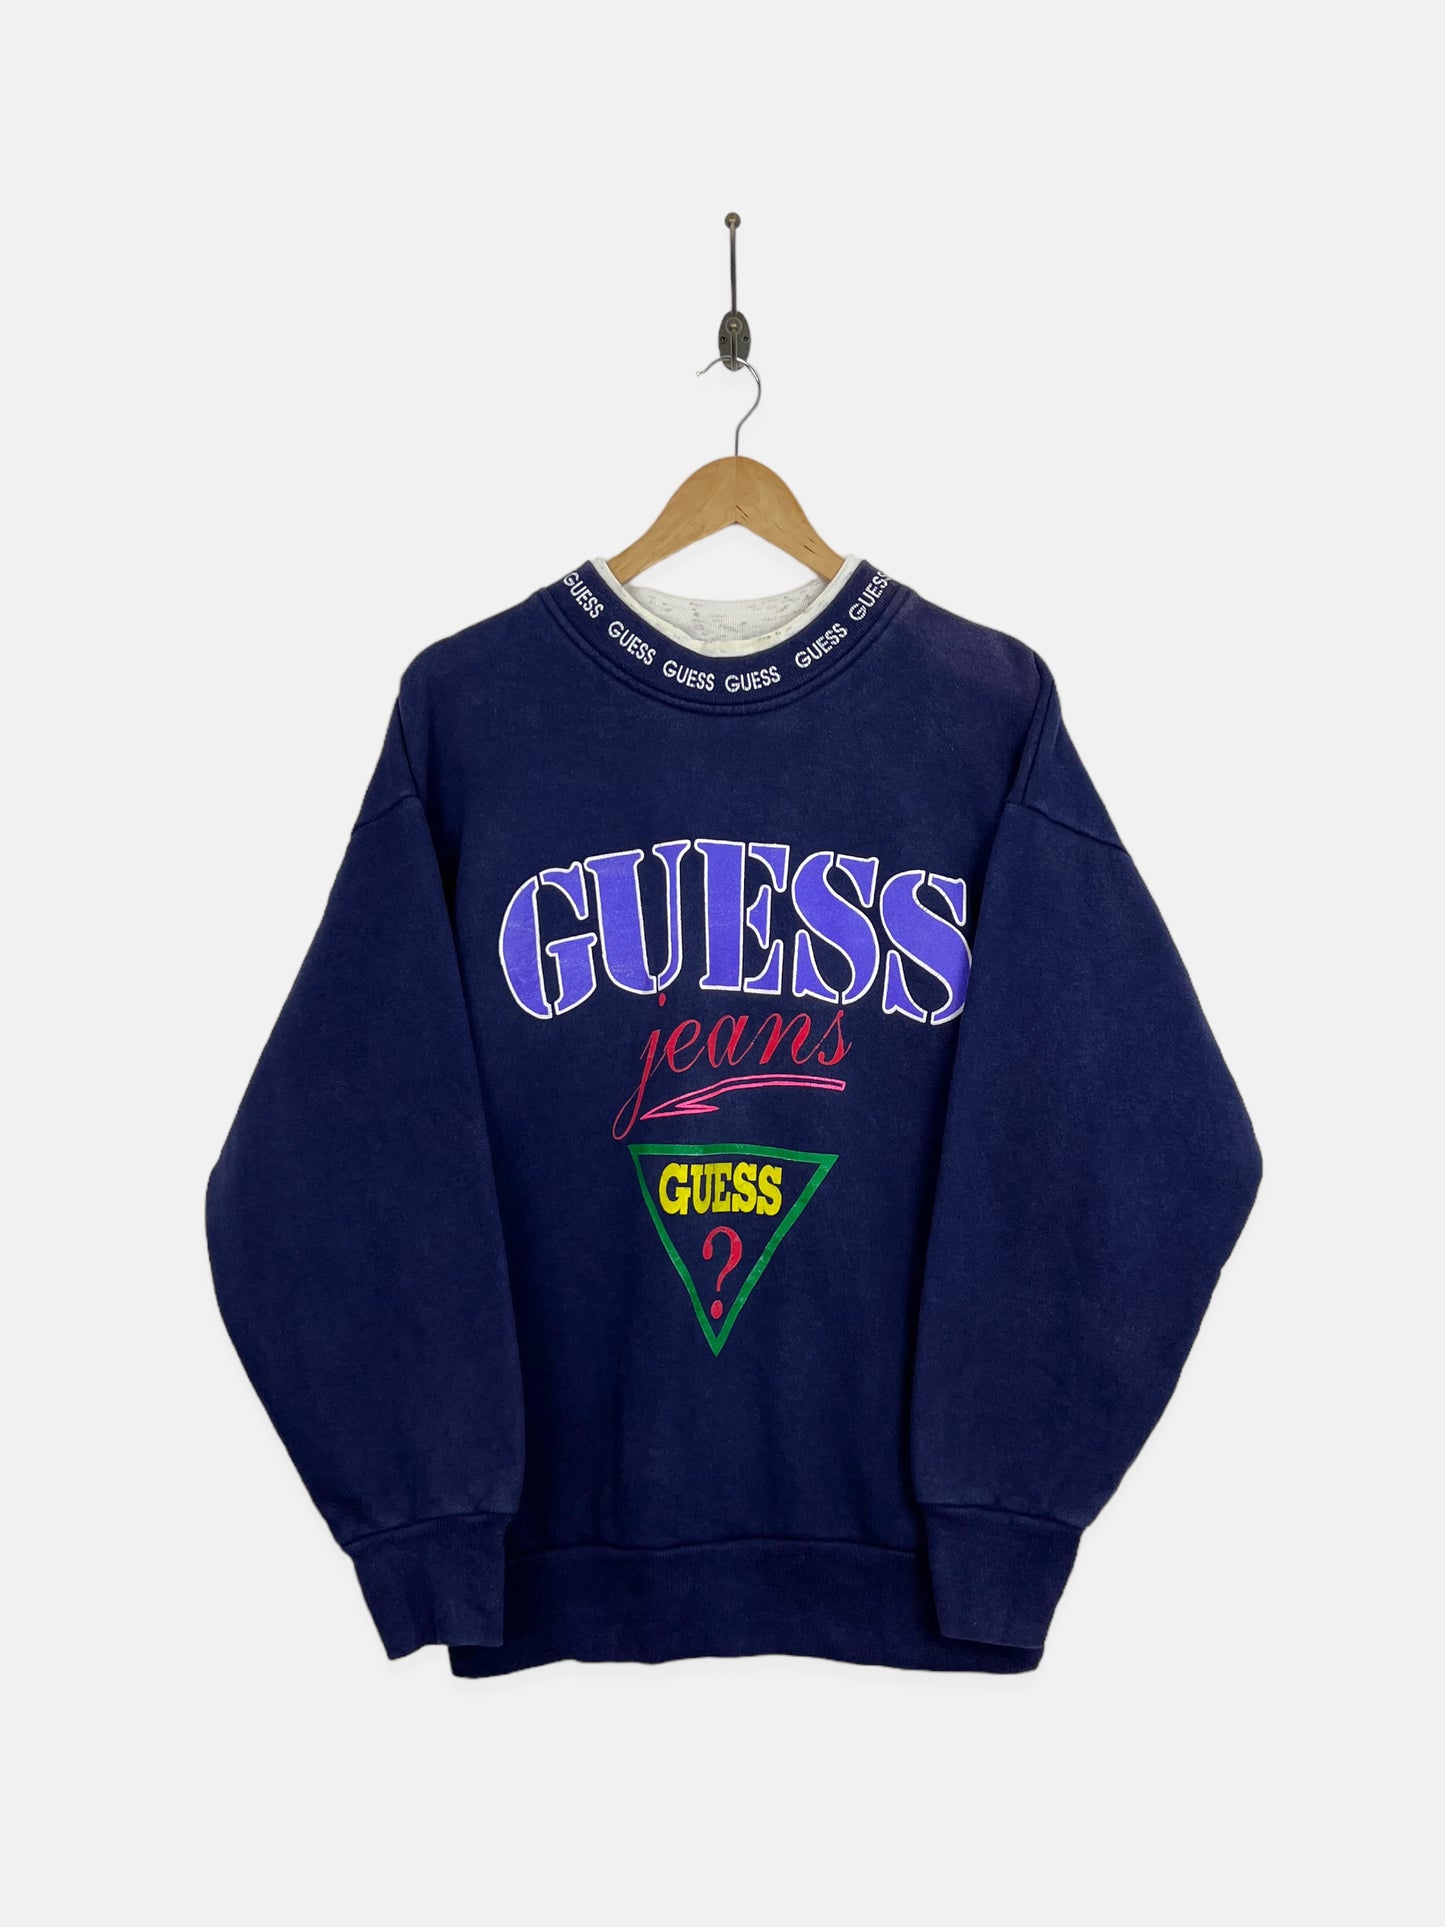 90's Guess Jeans USA Made Vintage High Neck Sweatshirt Size 12